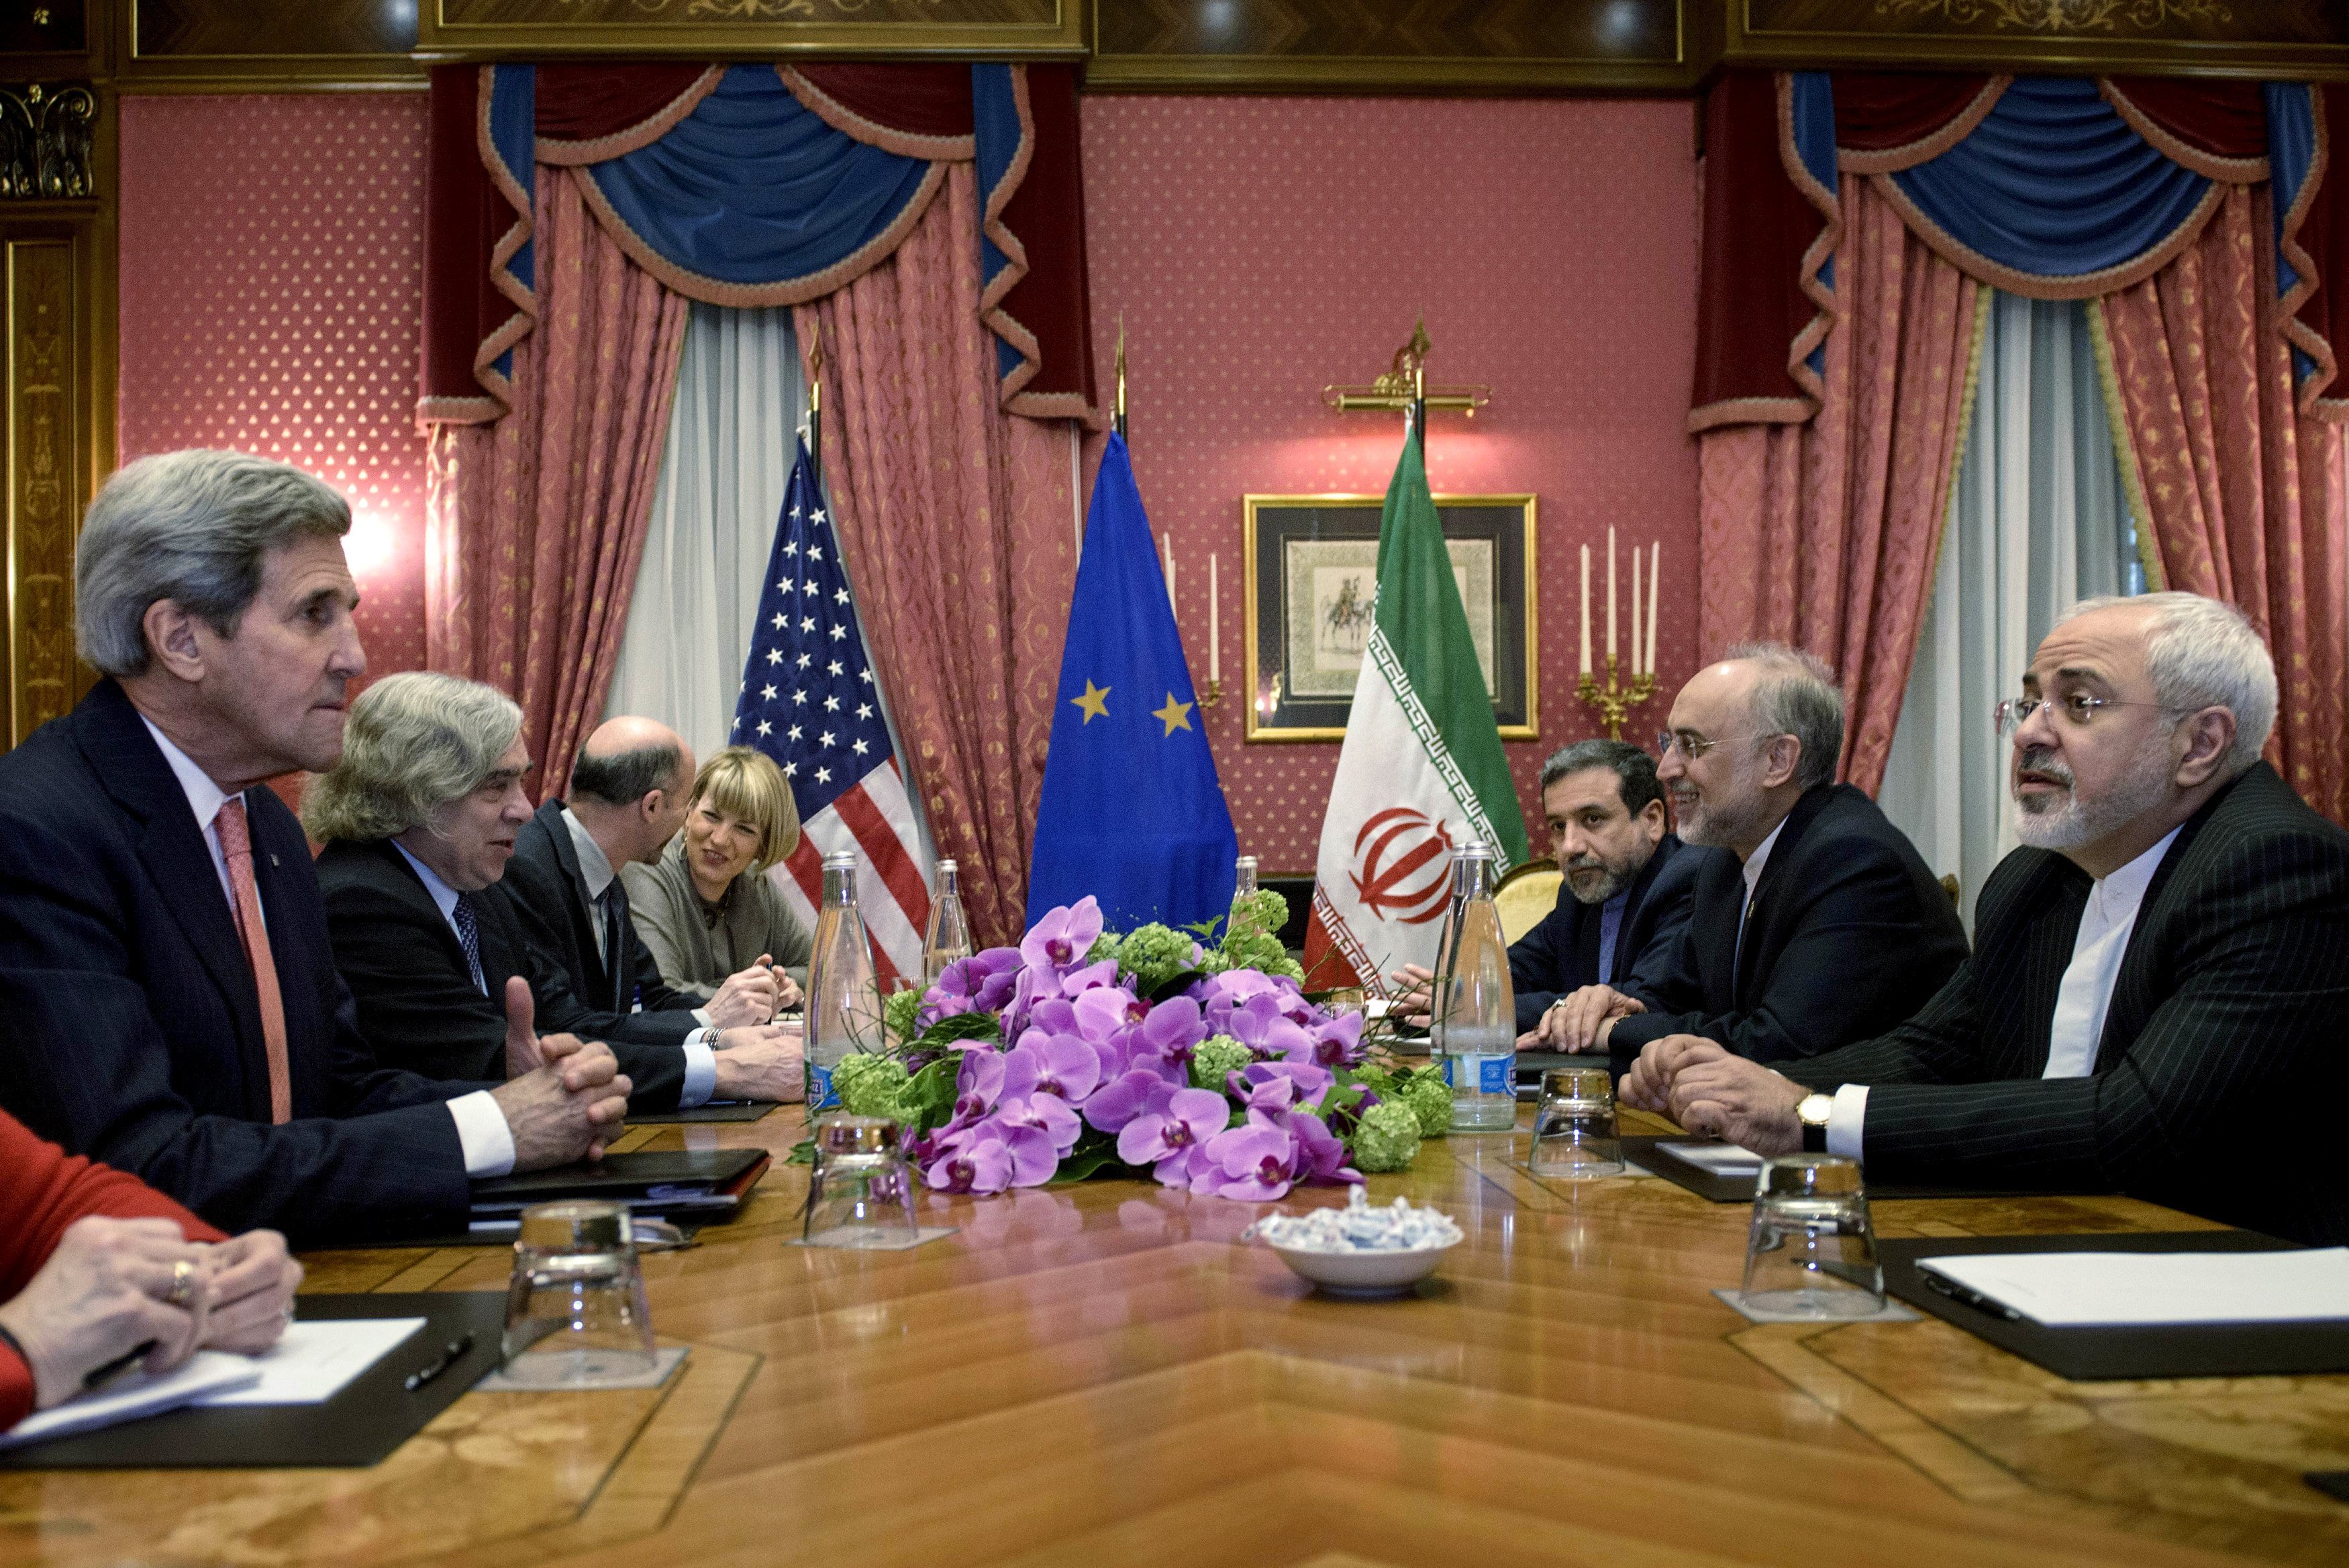 Secretary of State John Kerry, Iranian Foreign Minister Javad Zarif and others wait for a meeting at the Beau Rivage Palace Hotel on March 27, 2015 in Lausanne, Switzerland.